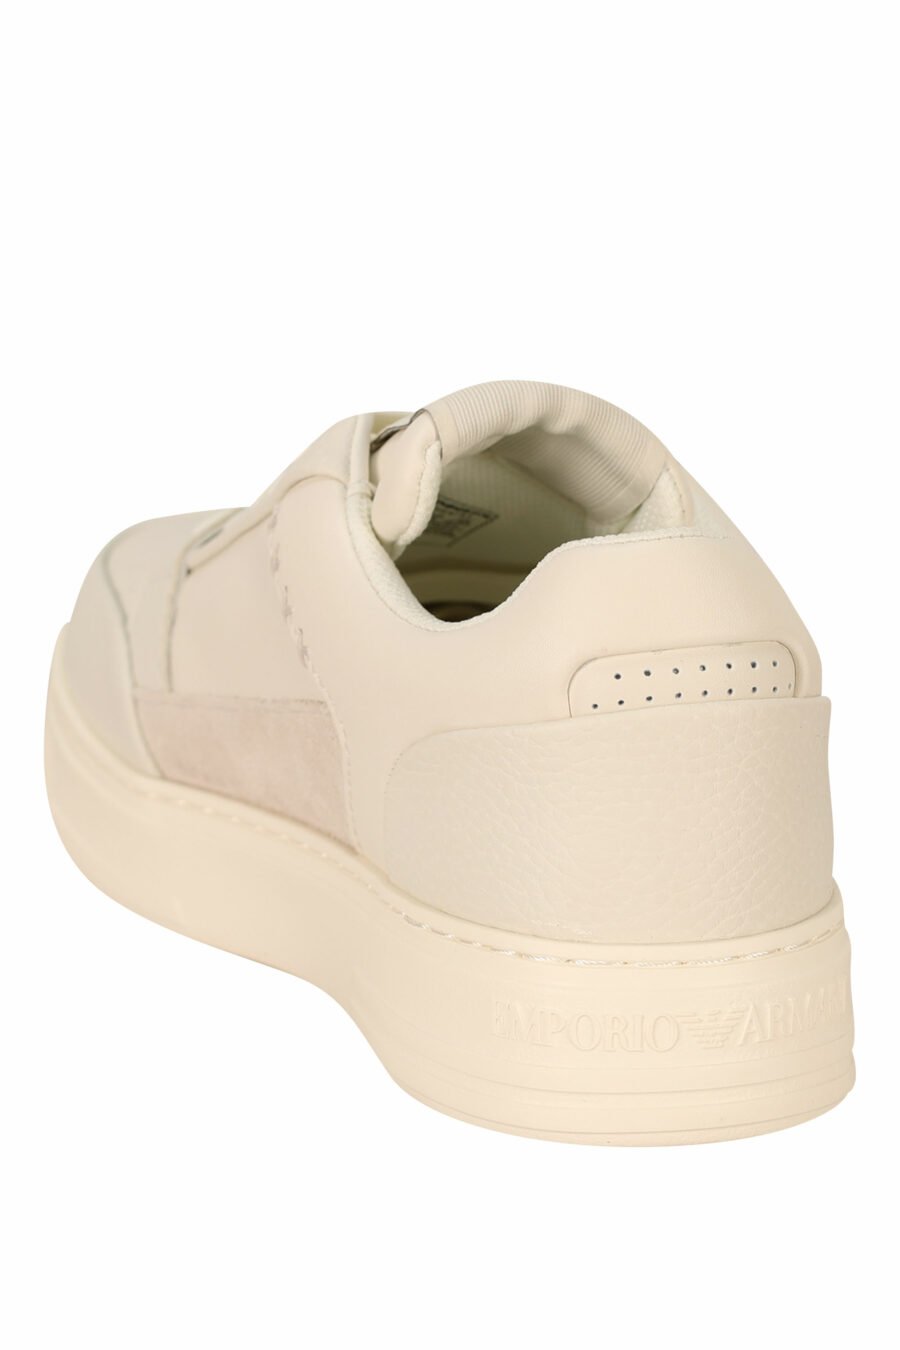 White trainers mixed with beige and rubber mini-logo - 8058947169122 3